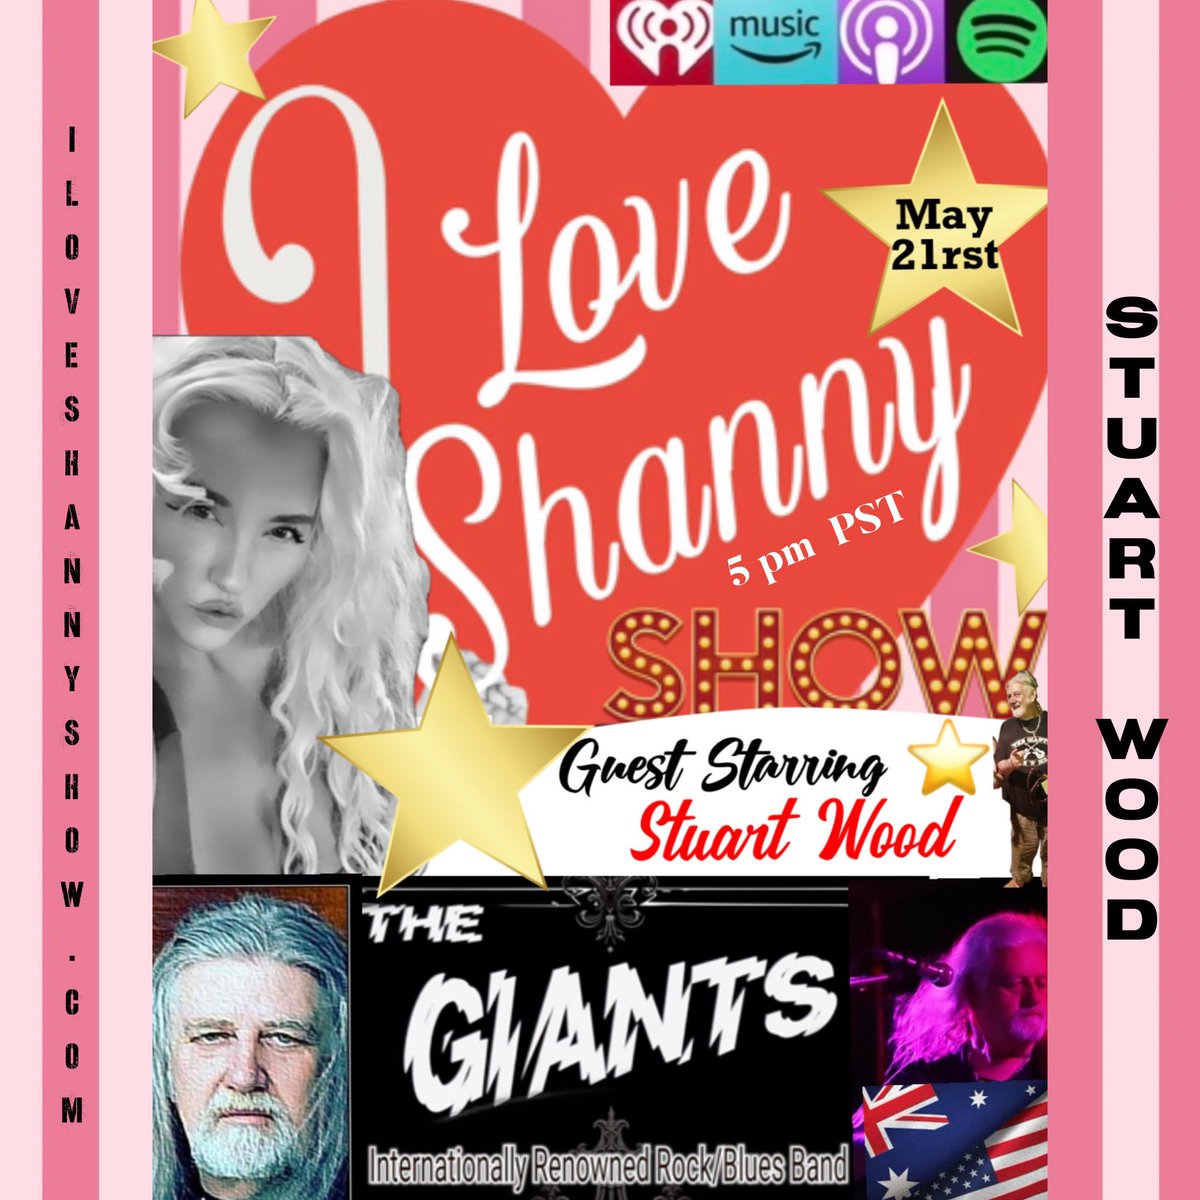 📣Tuesday May 21rsts✨ ❤️Episode Of...✨ ❤️I Love Shanny Show❤️ ❤️Airing At 5pm PST✨ ⭐️GUEST STARRING⭐️ 🎸Stuart Wood🎸 🎶Of... The Giants🎶 🤘Joins Me🤘 🥁From All The Way🥁 ✨🇺🇸Across The Pond🇦🇺✨ 🎉For An Entertaining Hour🎉 🔥You Won't Wanna